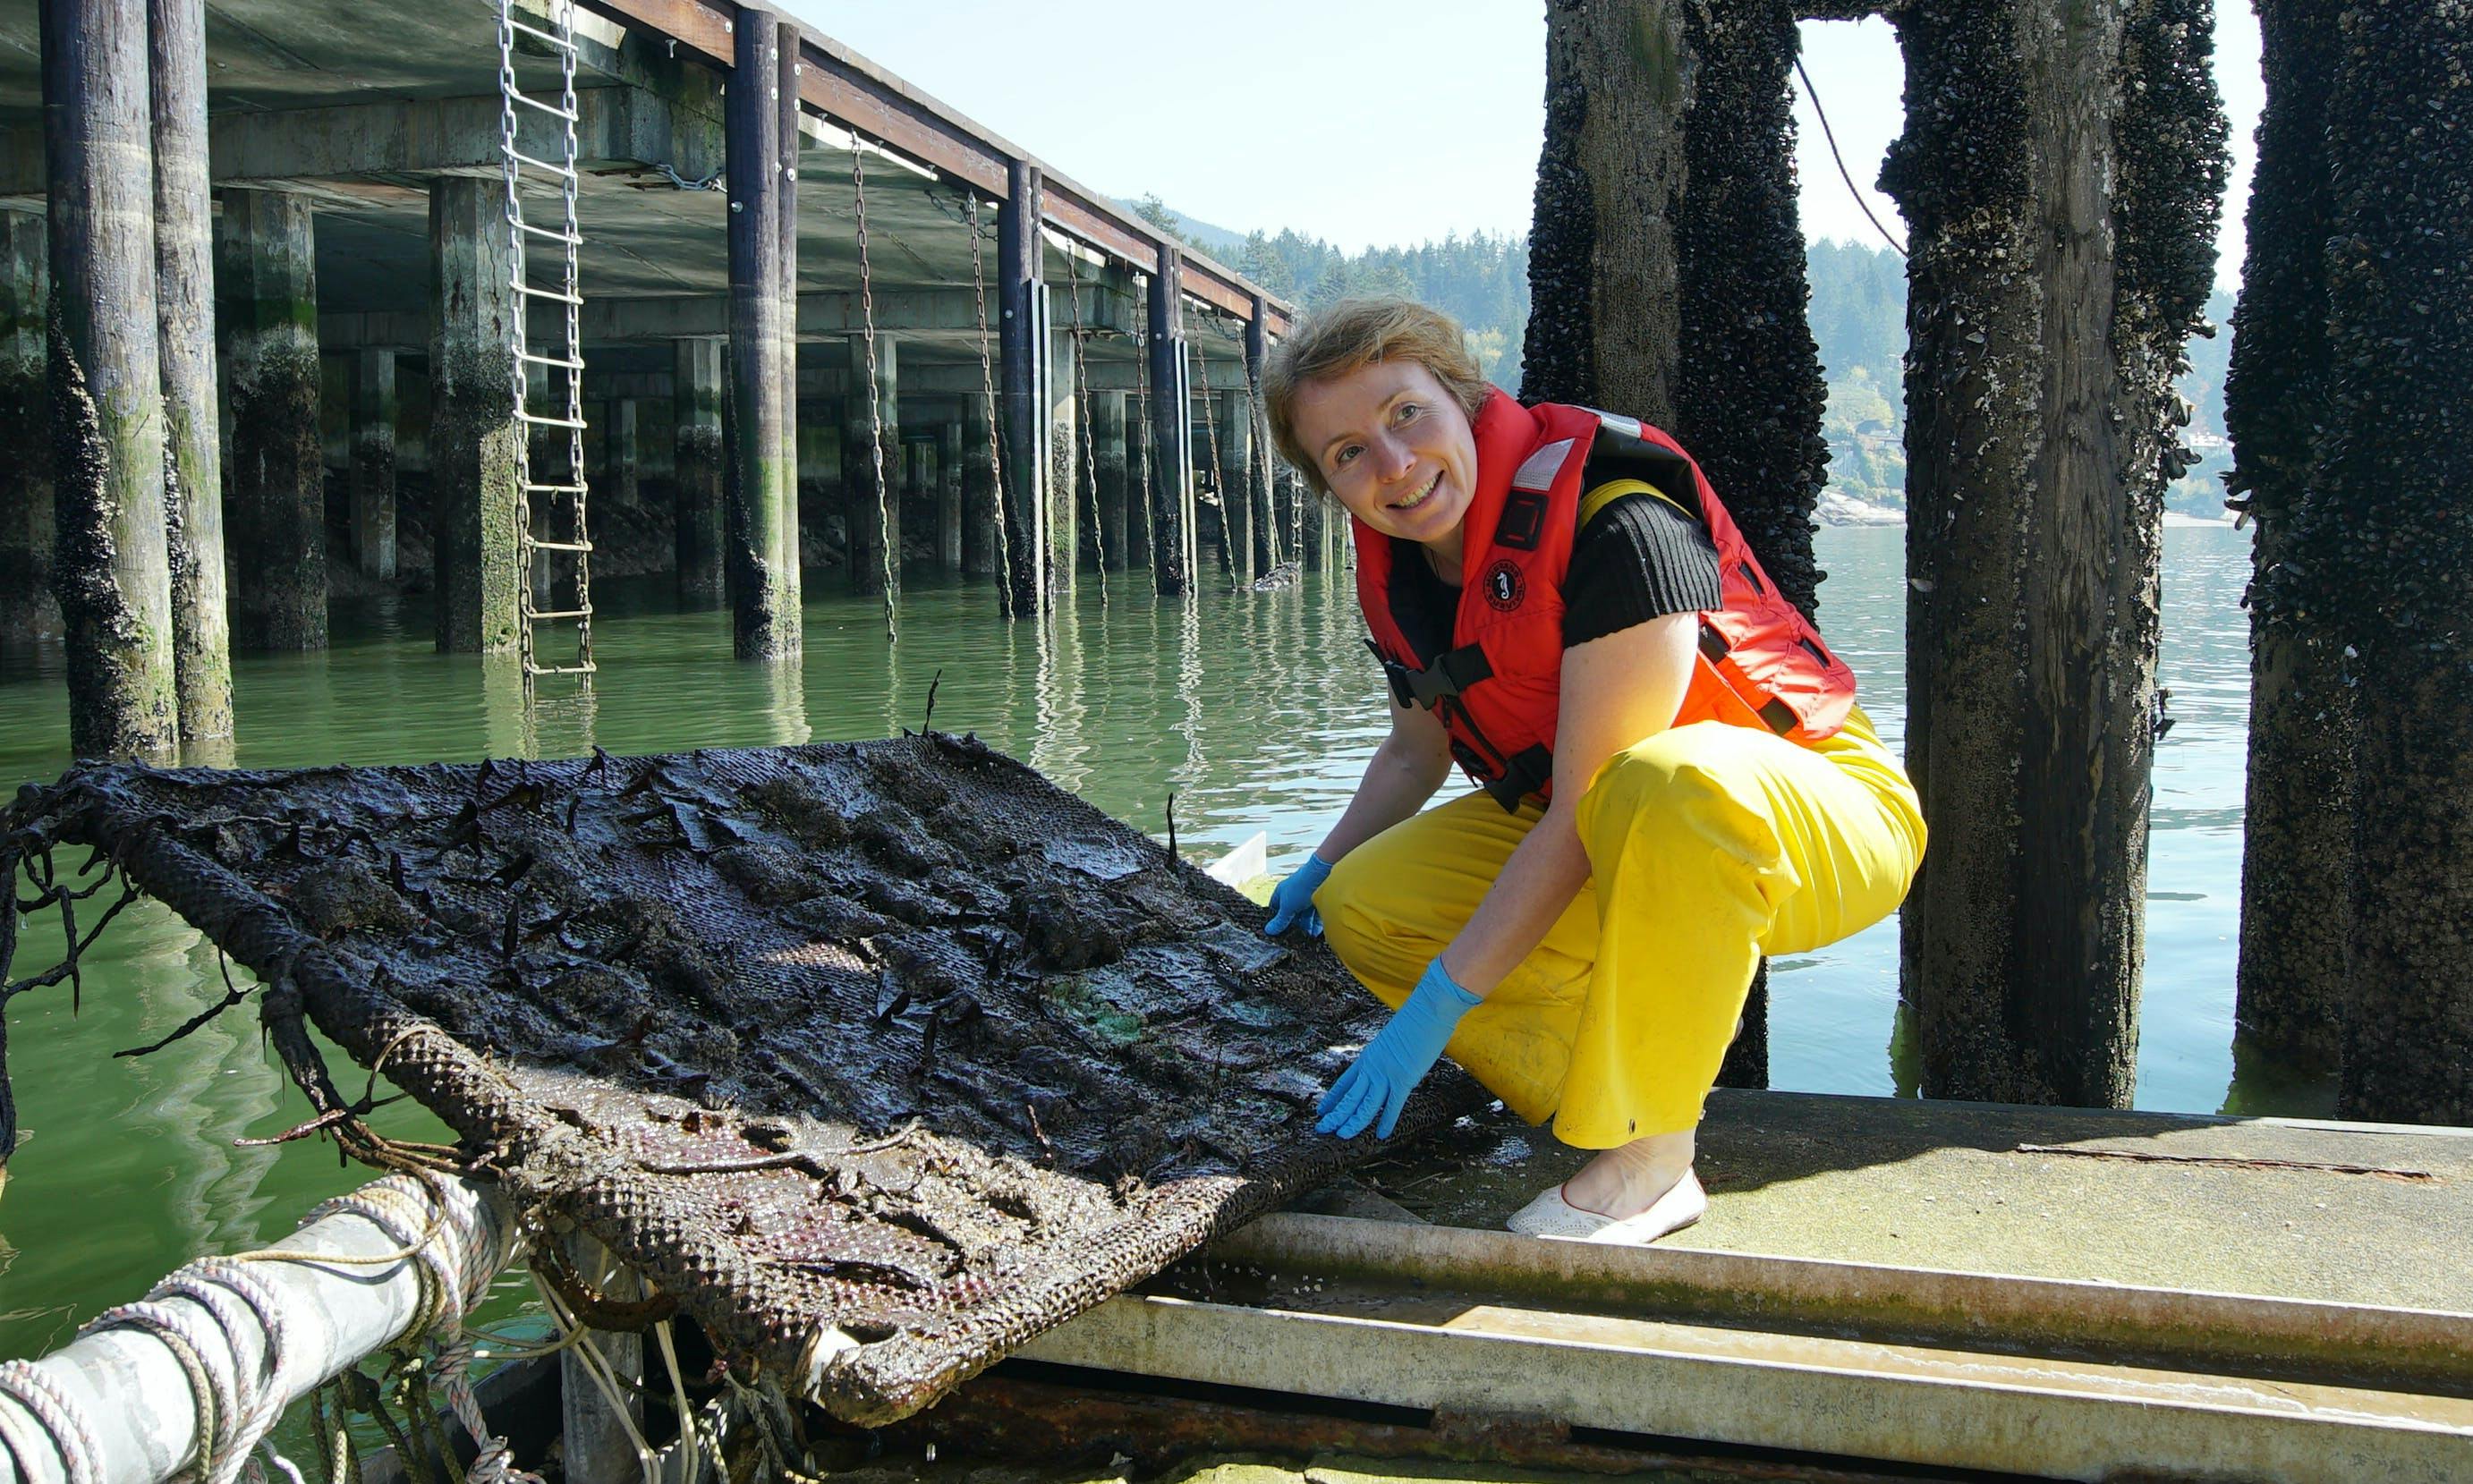 Researcher holding a large sheet of textile samples near the ocean